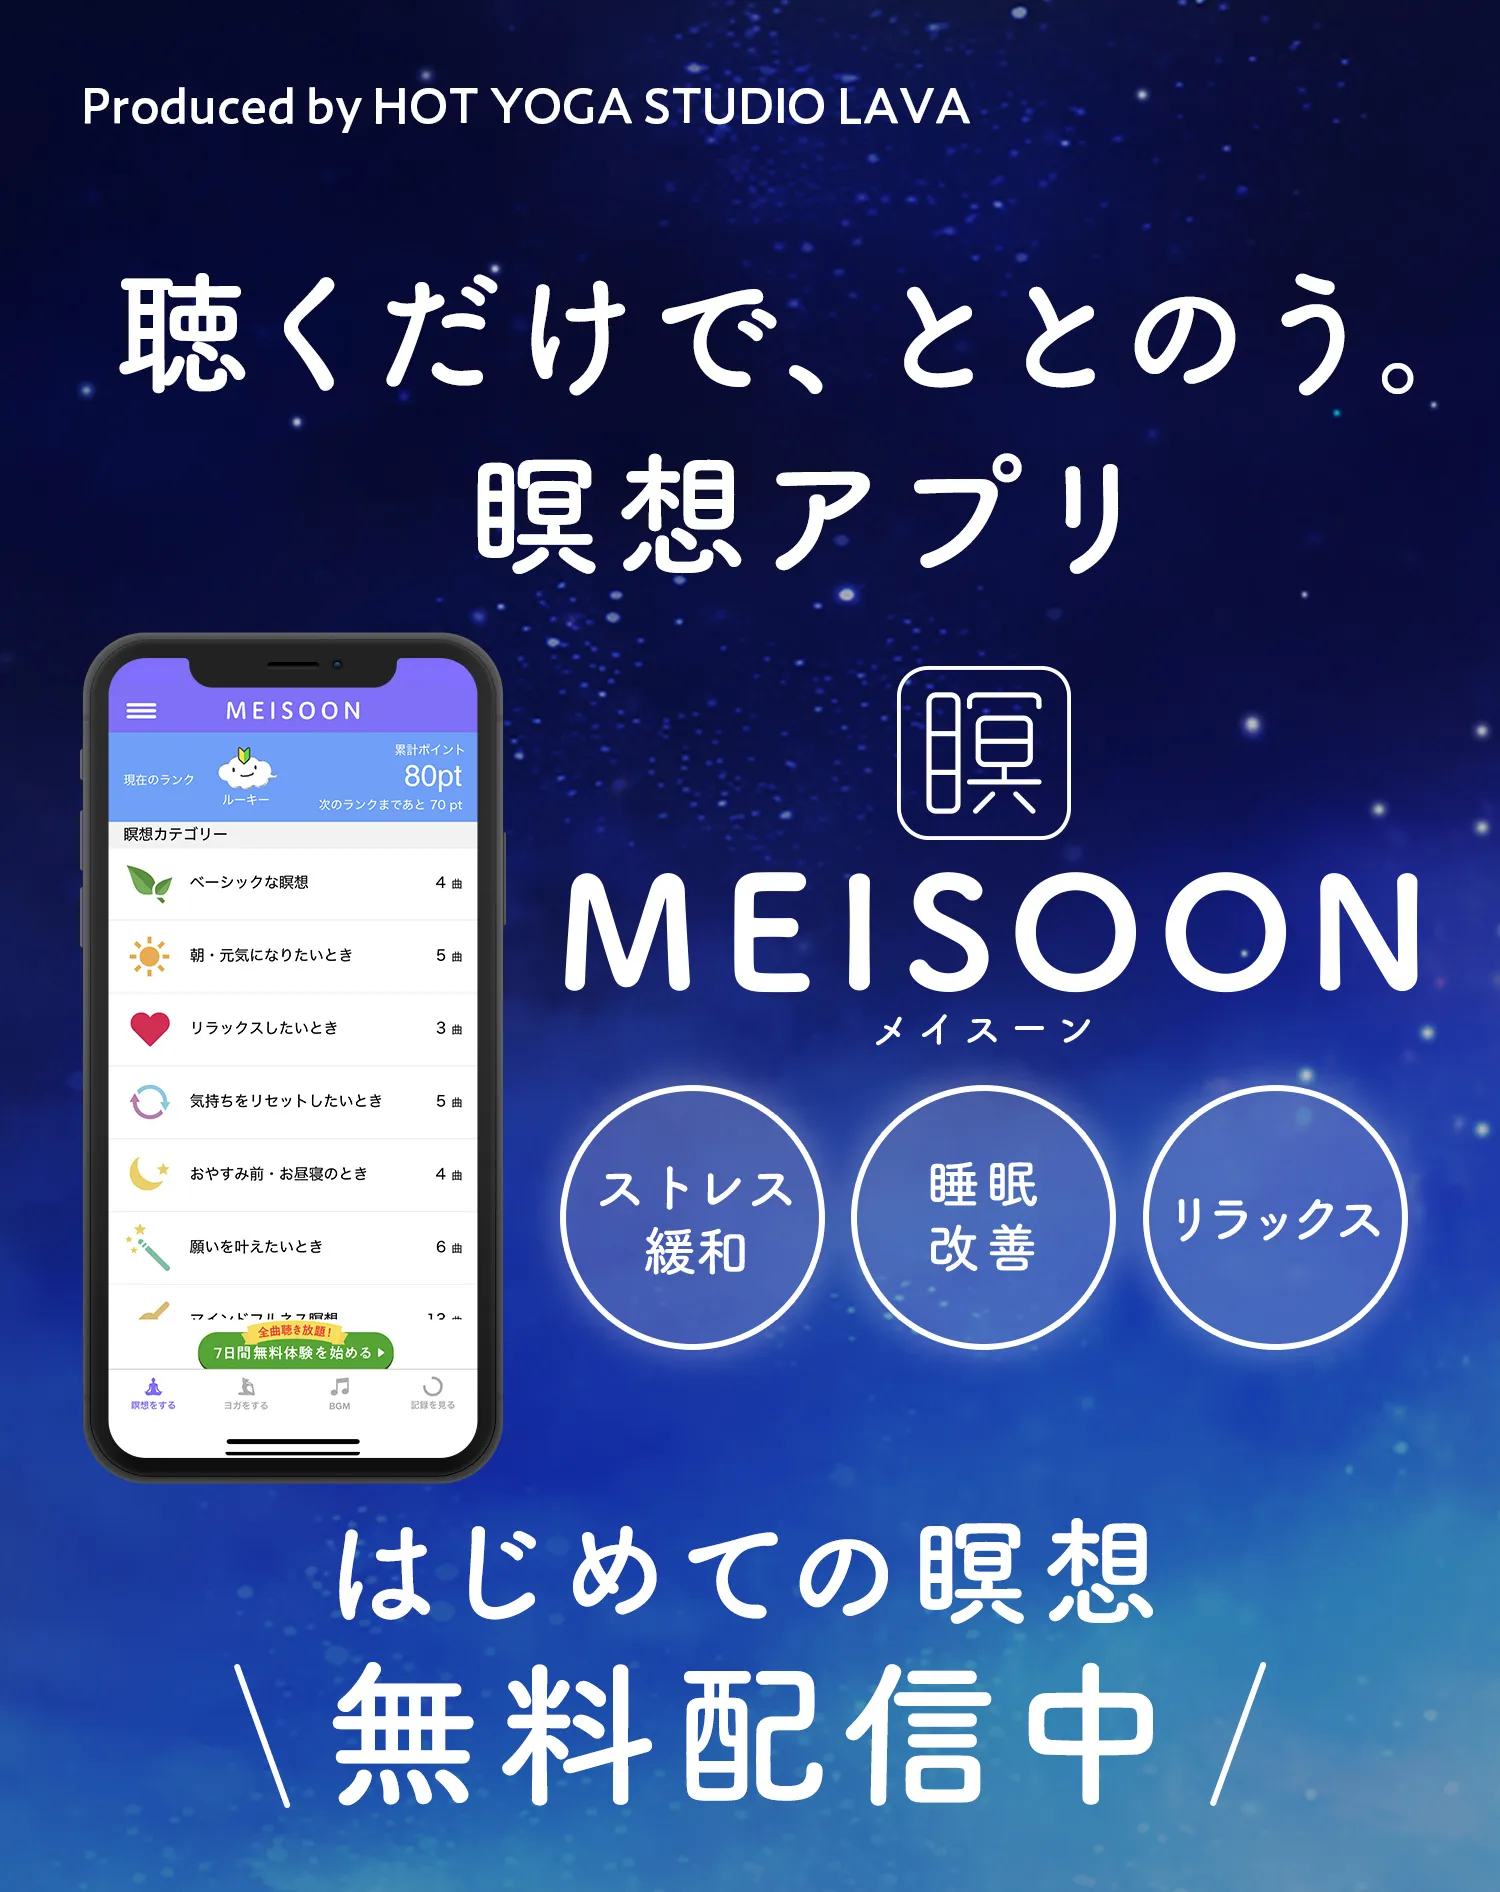 LAVAオリジナル瞑想アプリ|MEISOON(メイスーン)